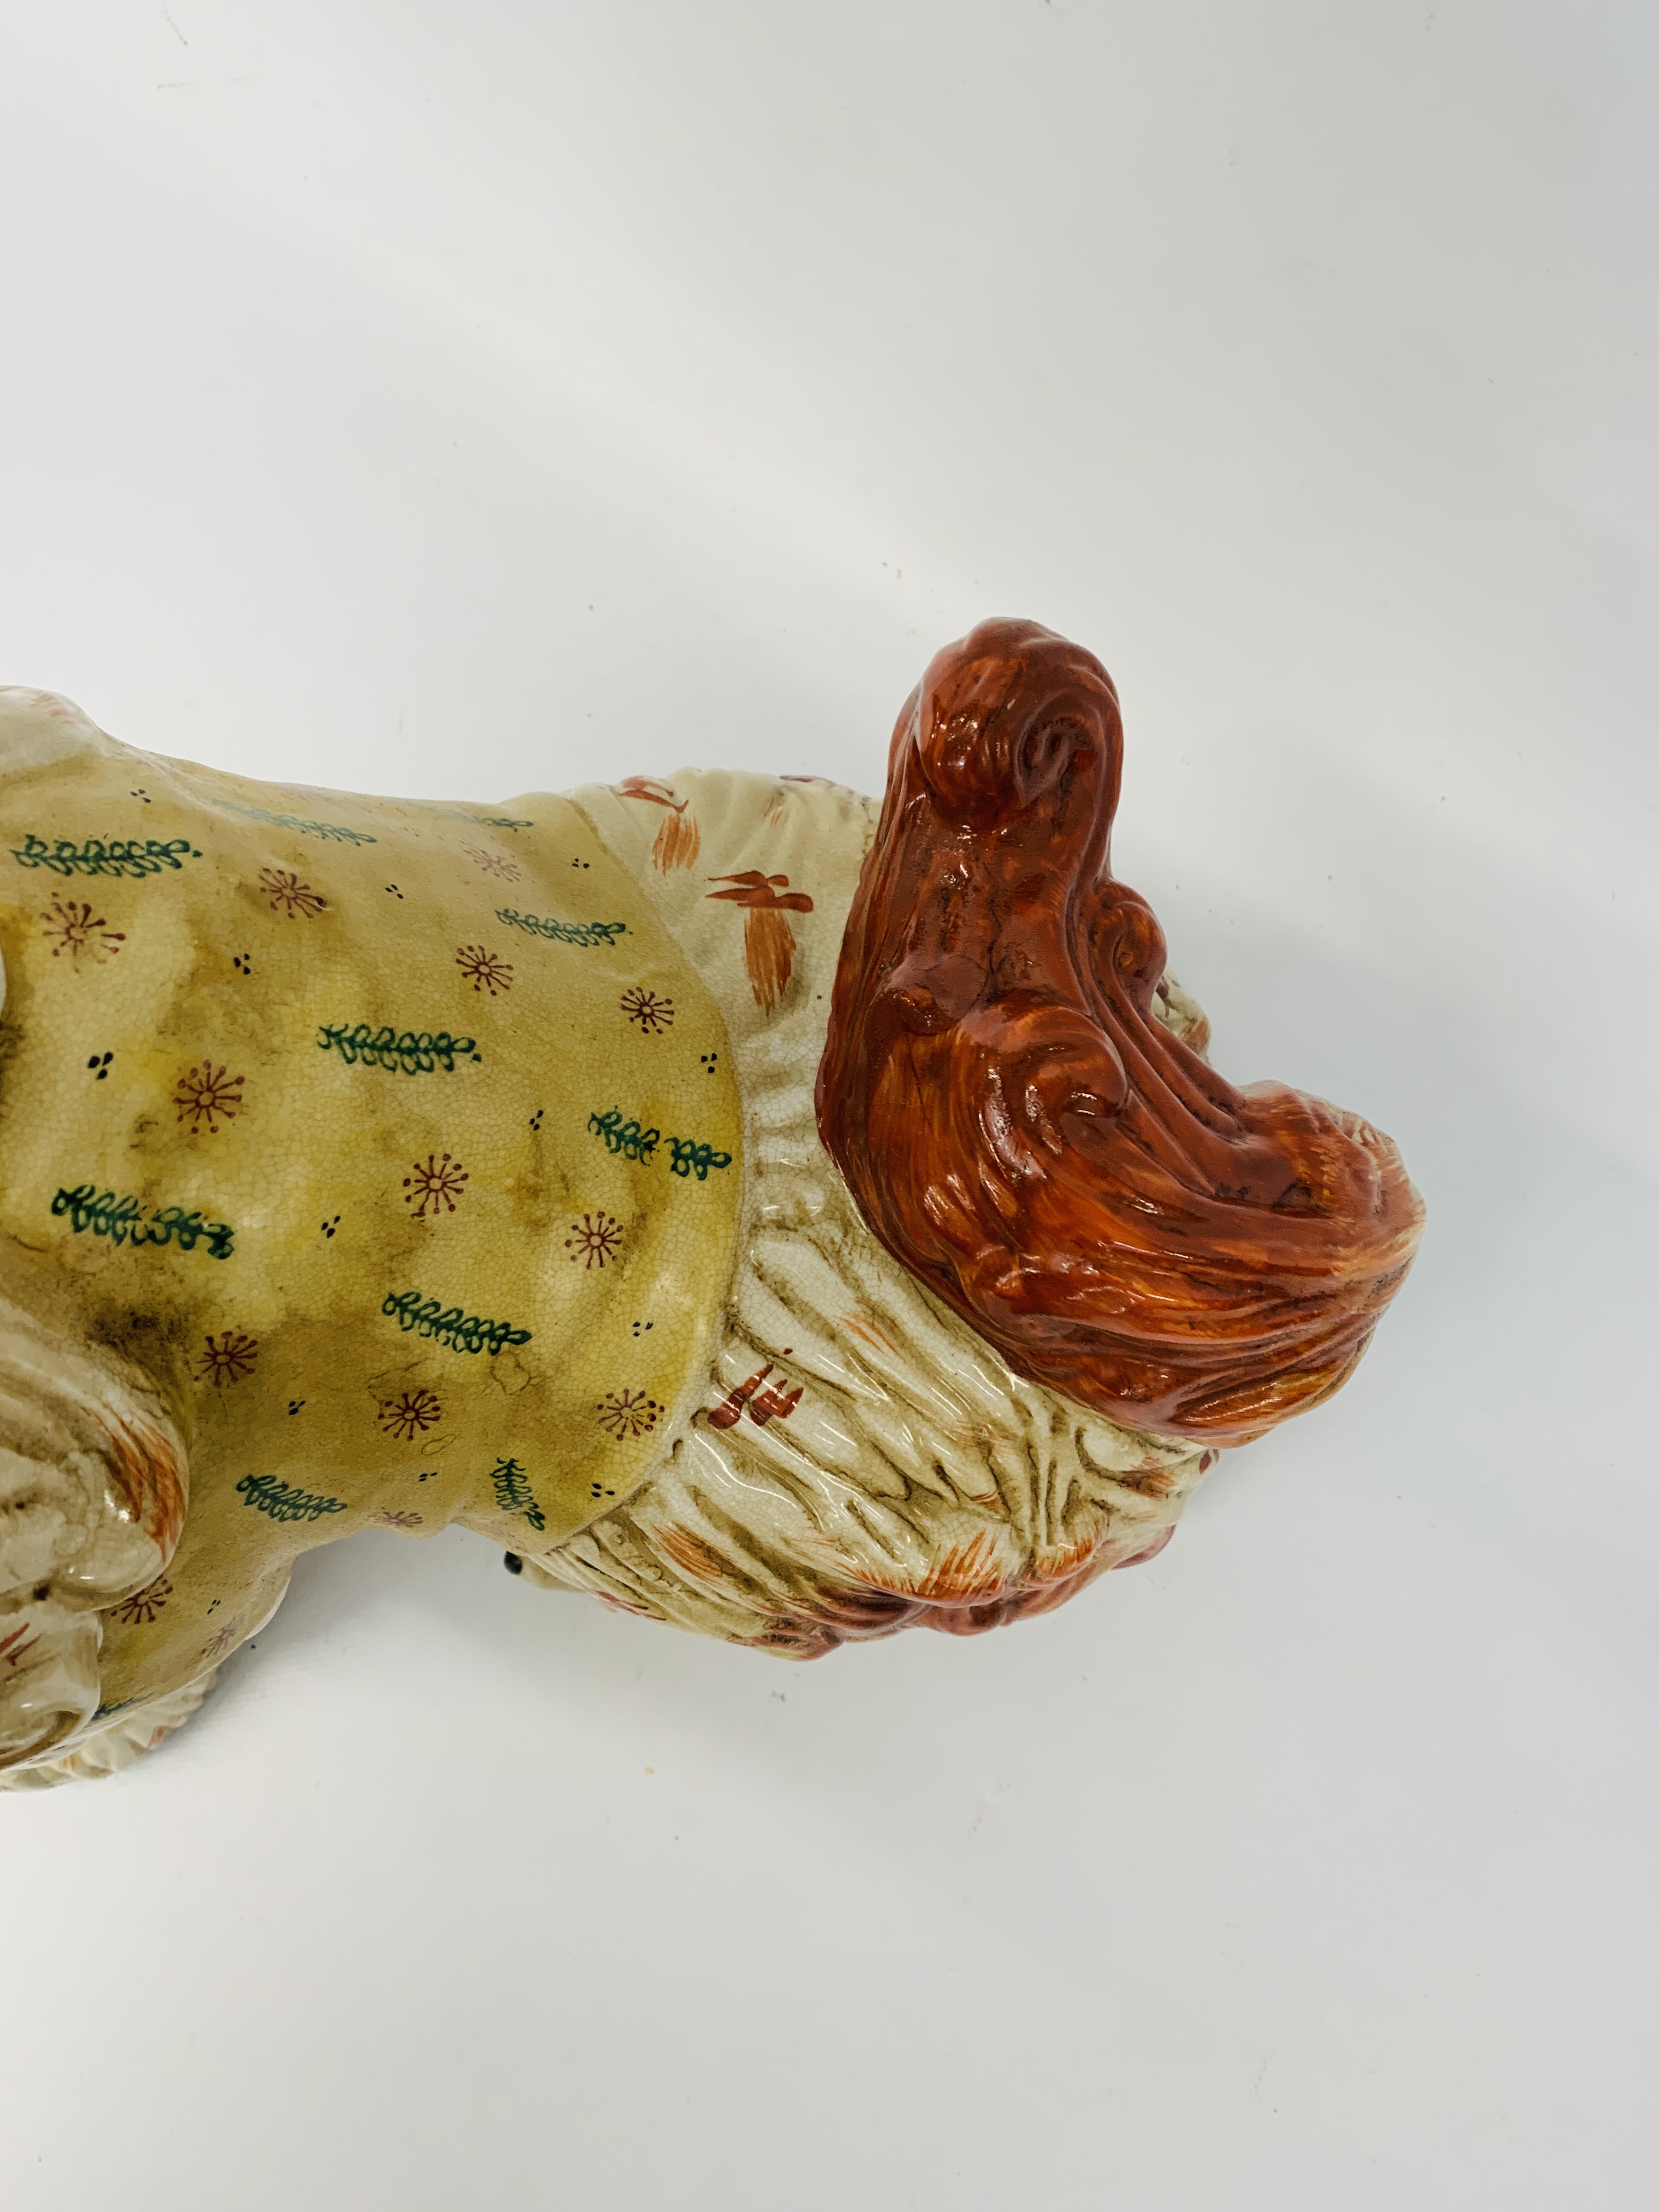 A LARGE REPRODUCTION STAFFORDSHIRE STYLE DOG ORNAMENT "JOCK" HEIGHT 45cm - Image 6 of 8